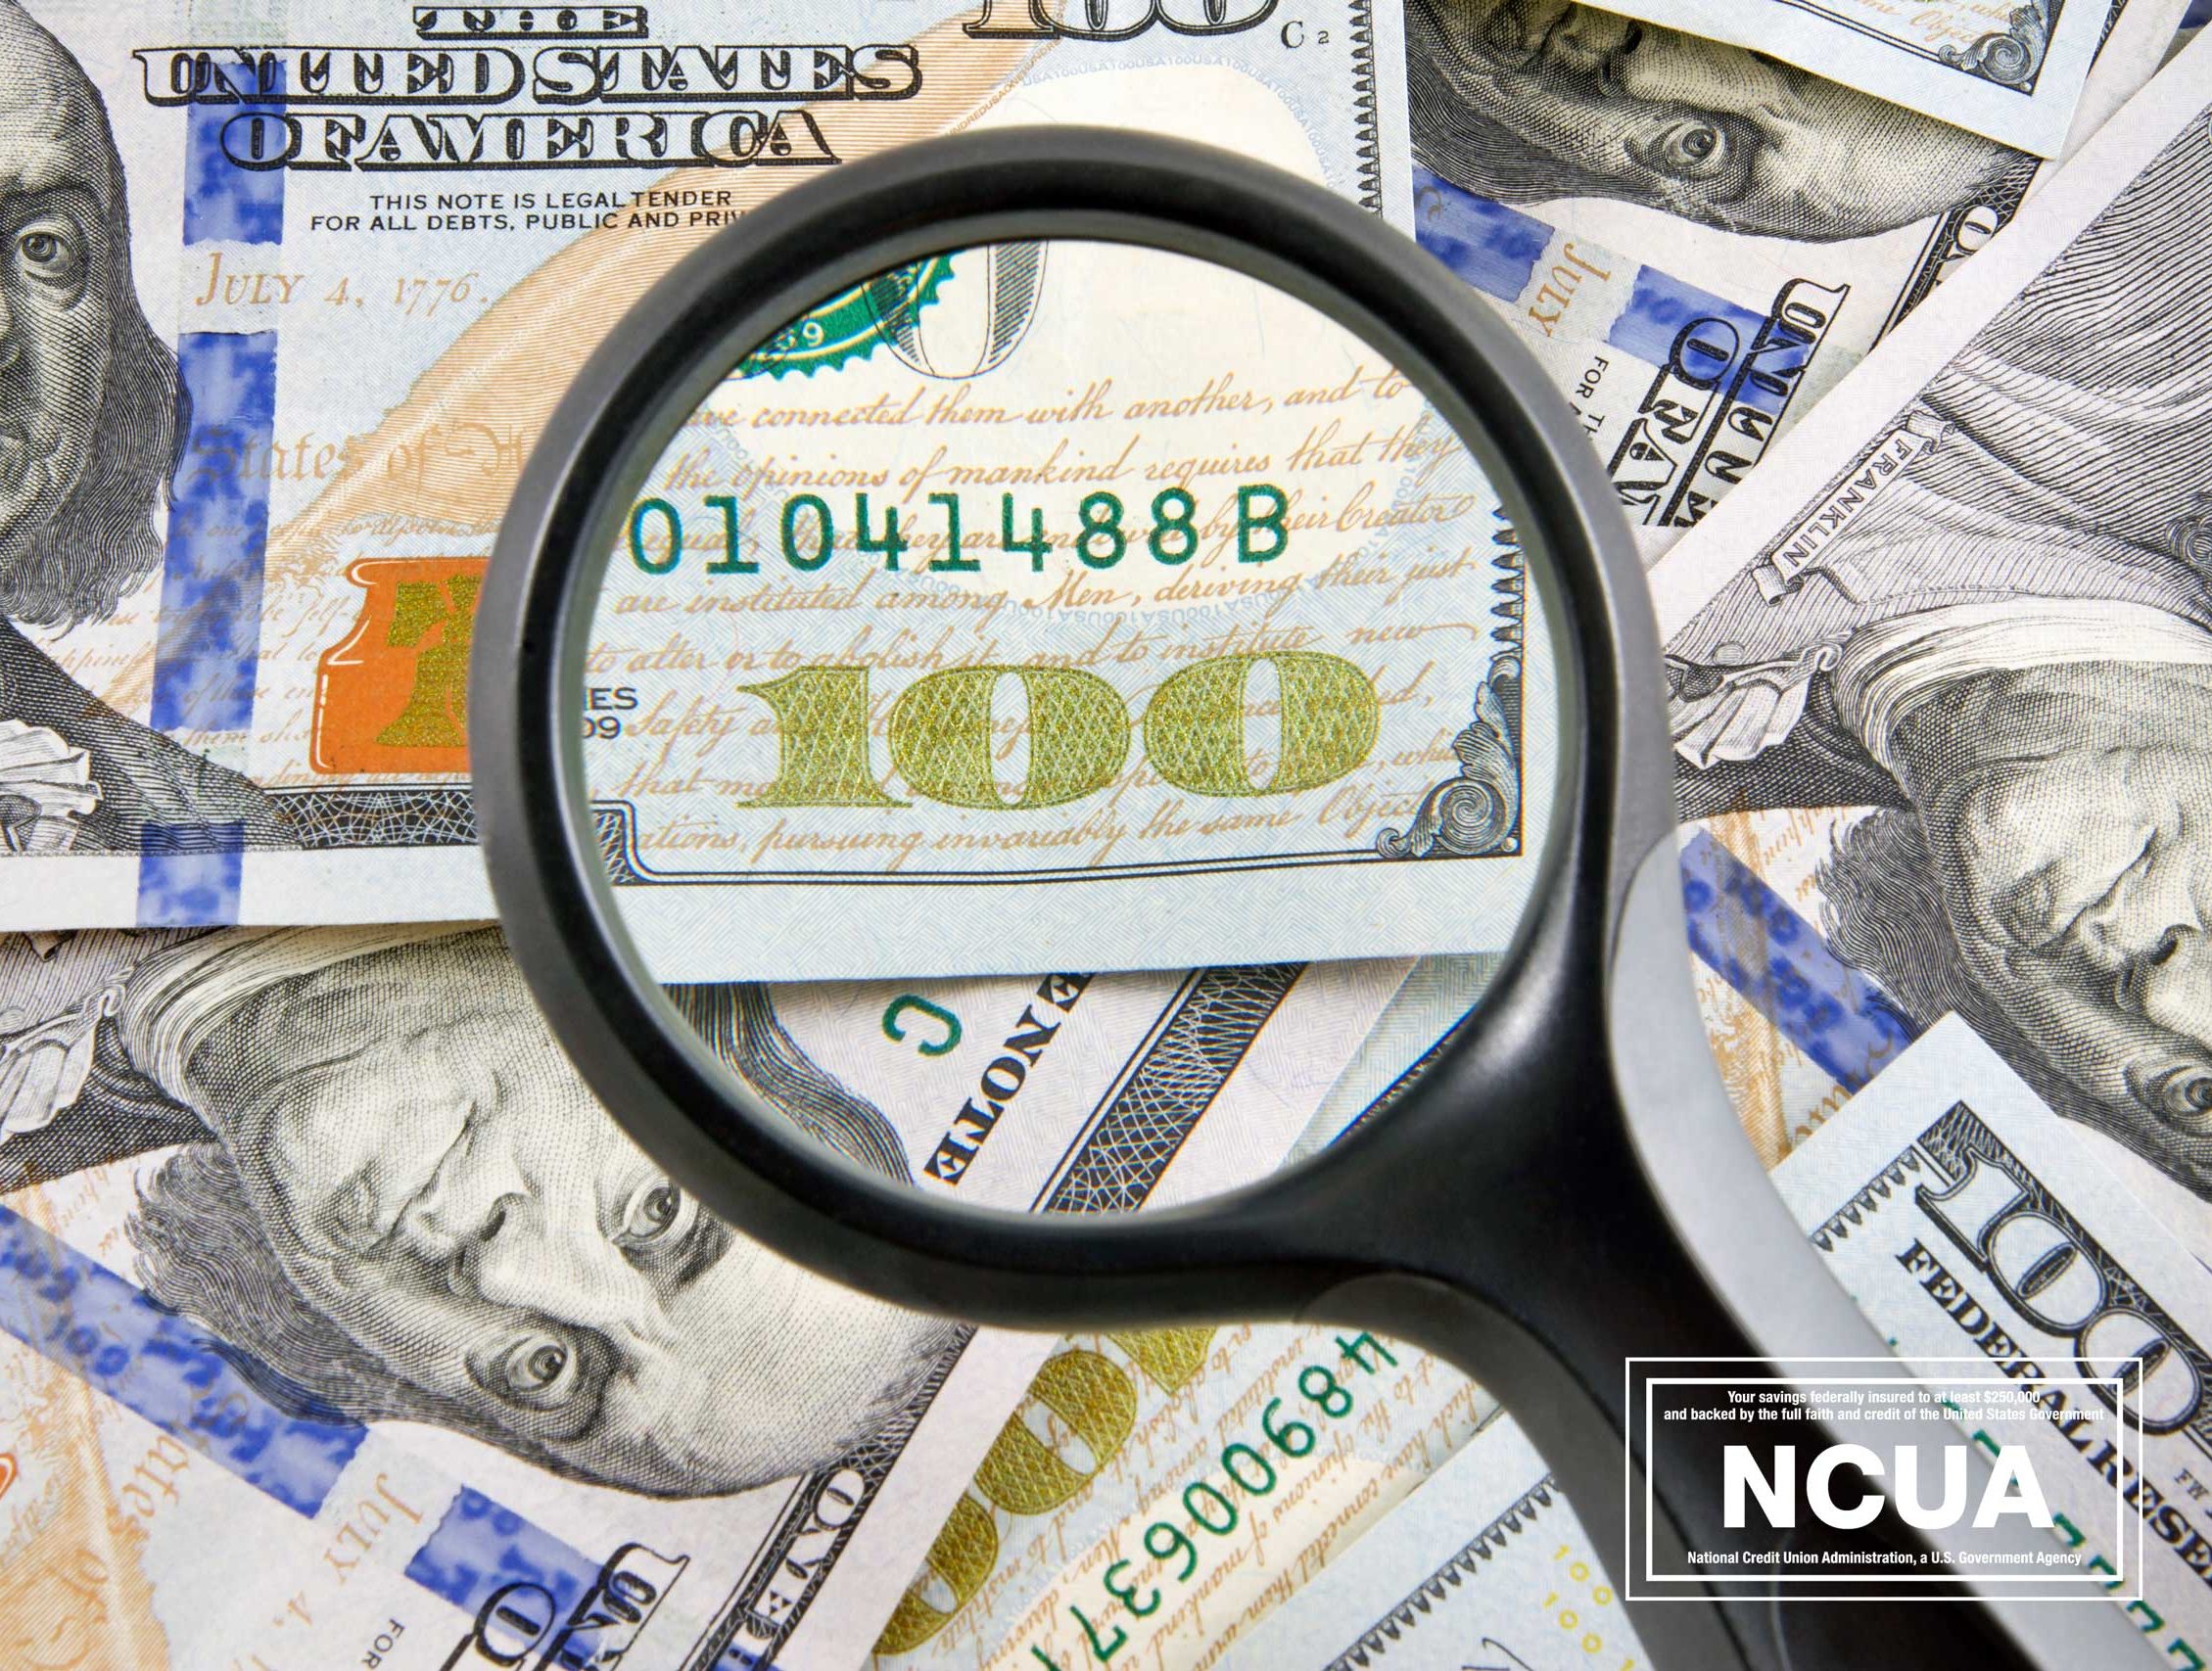 If you identify counterfeit money, it’s important to understand what you should and should not do.